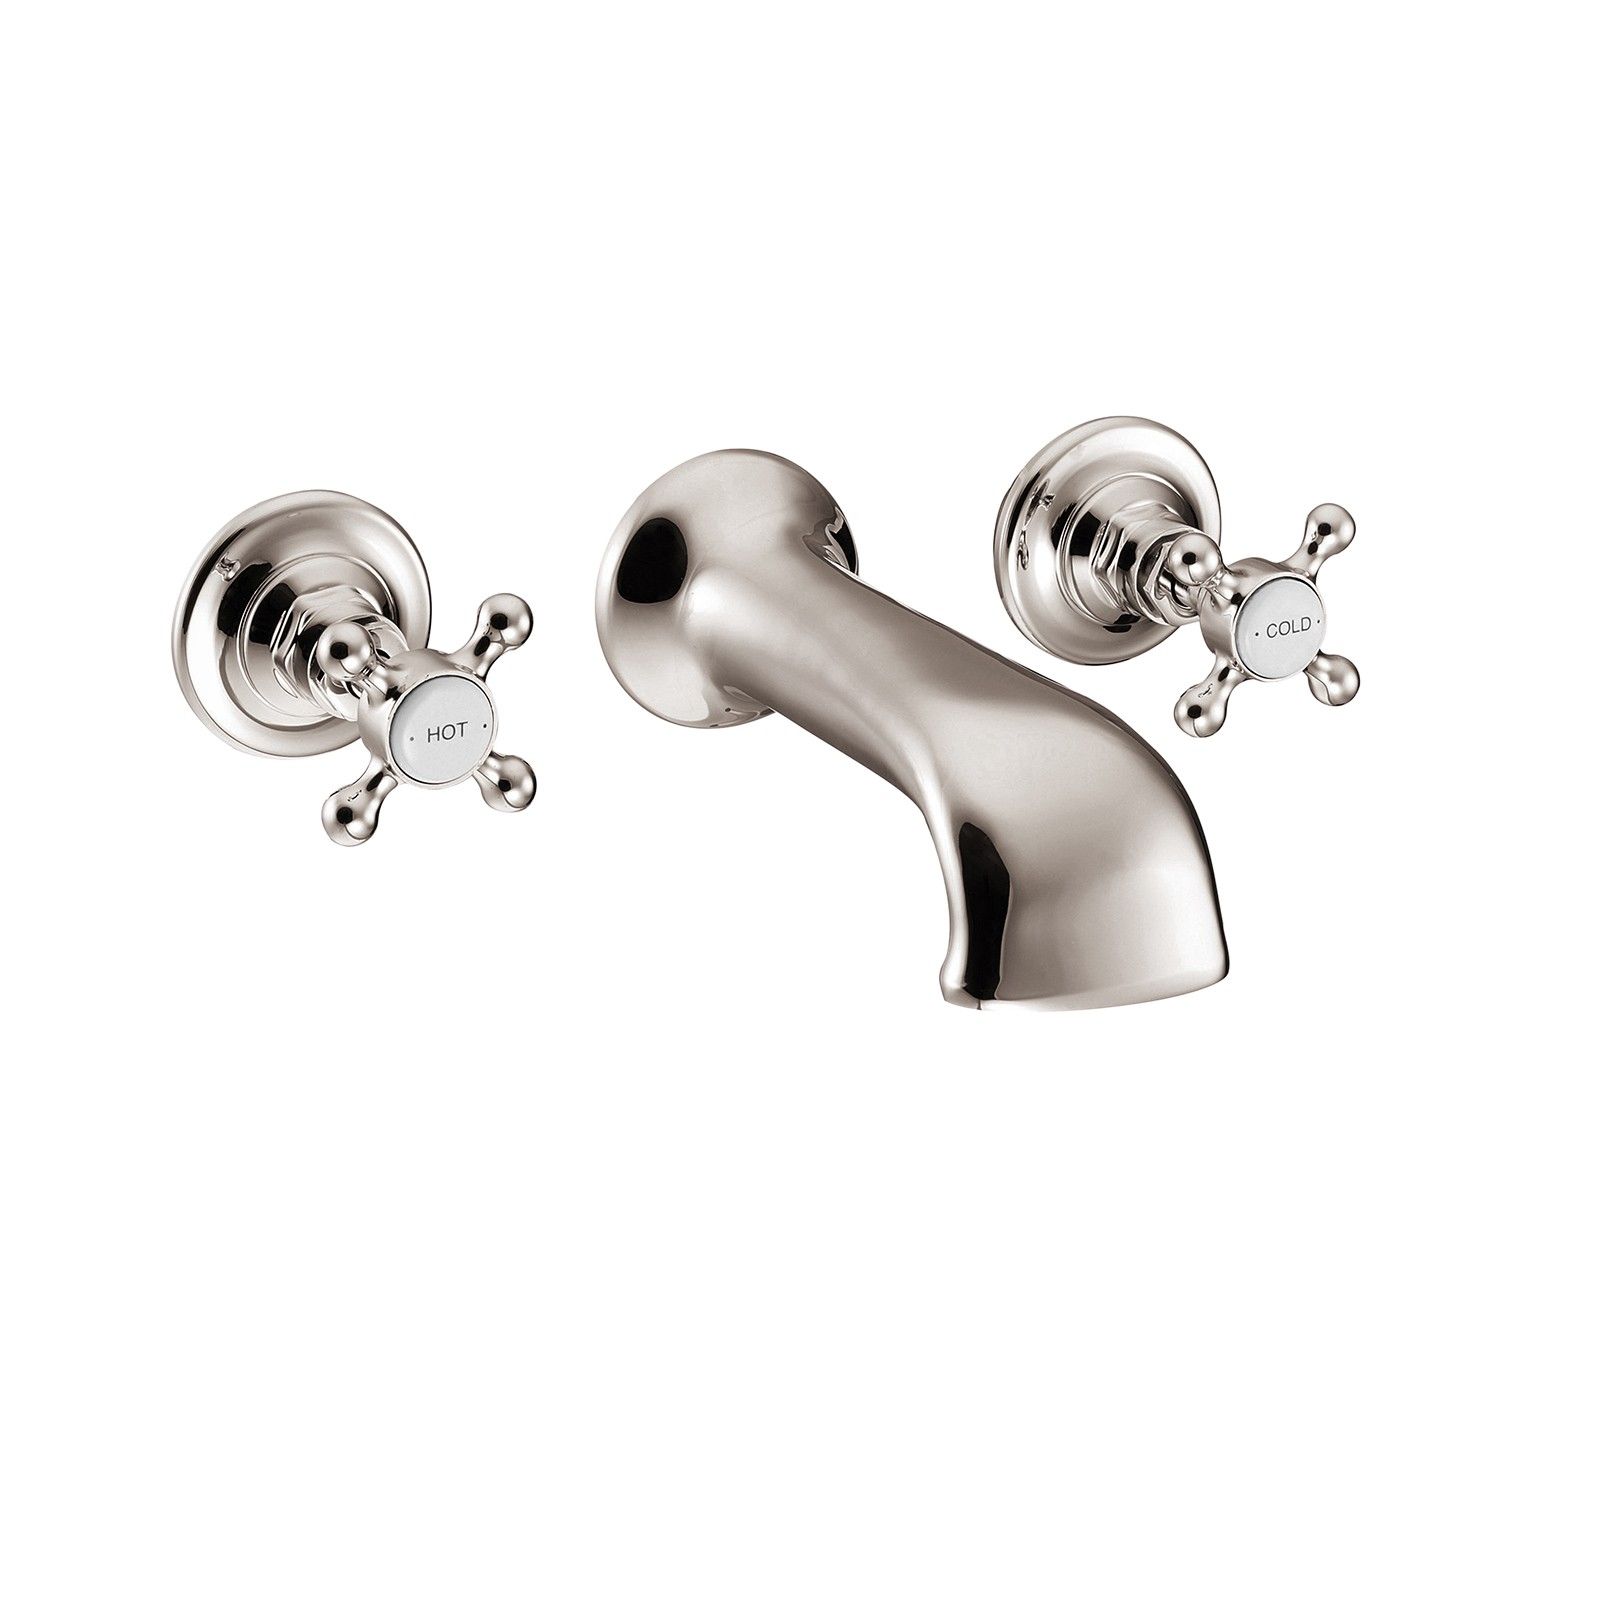 Wall Mounted Three Piece Bath filler - in Chrome, Nickel or Copper